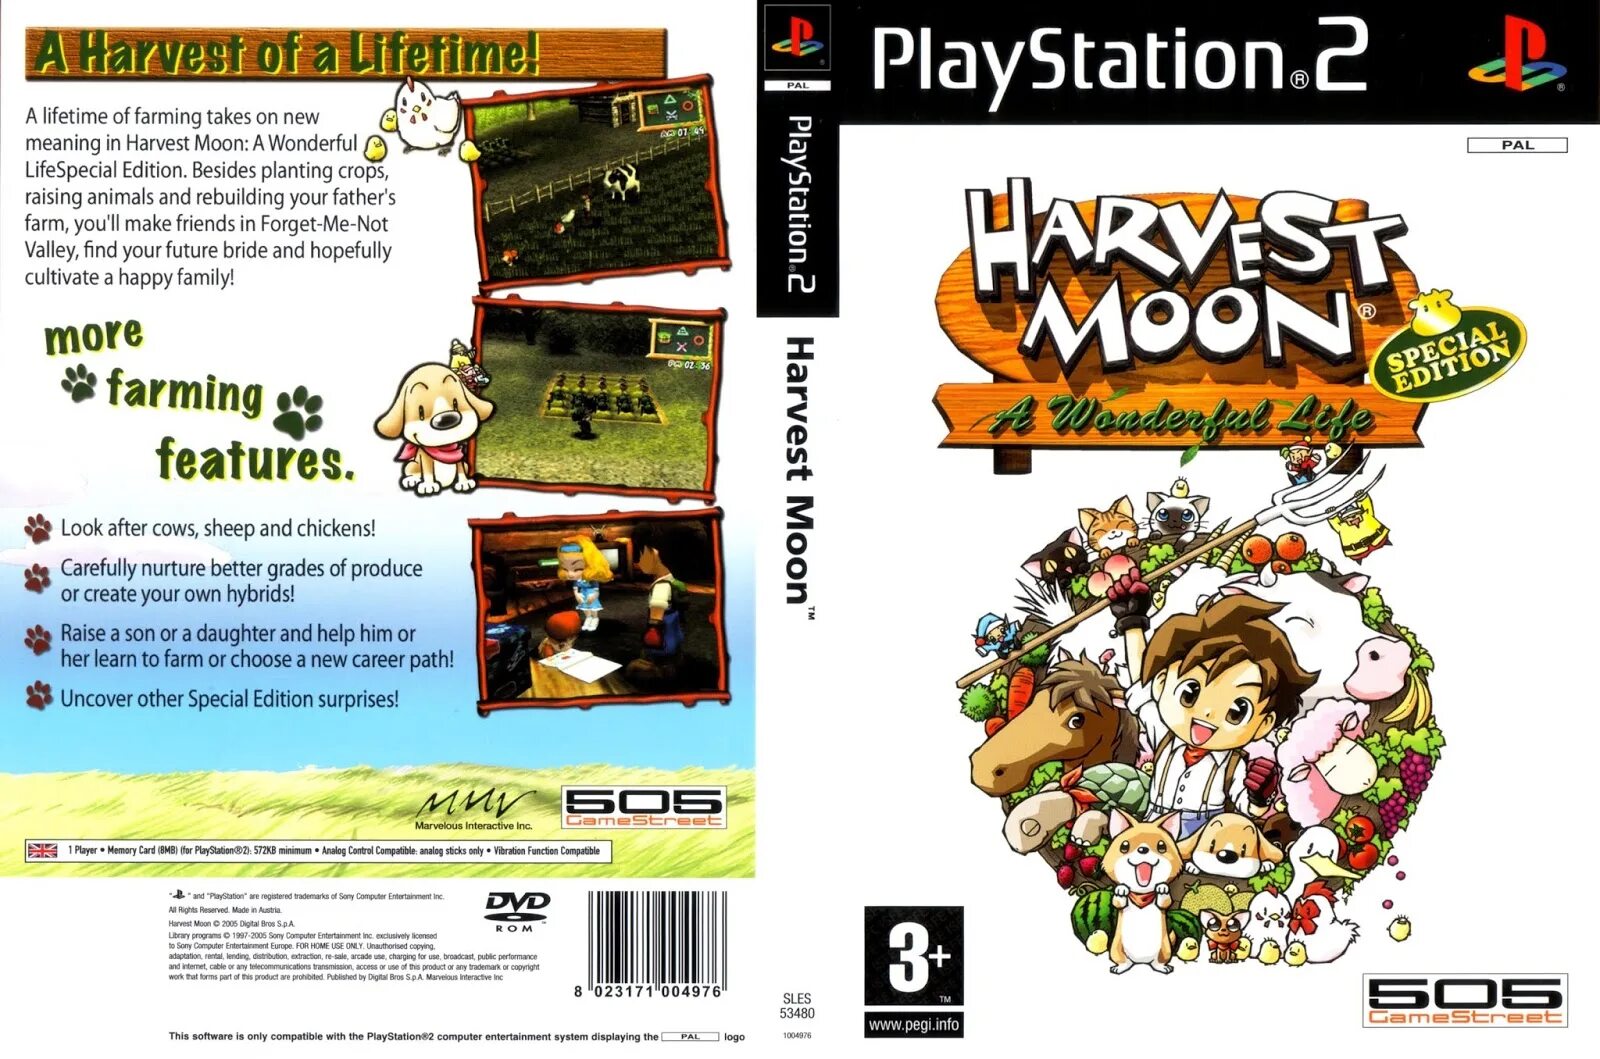 This is the life special version. Harvest Moon: a wonderful Life ps2. Harvest Moon a wonderful Life Special Edition. Harvest Moon обложка. Harvest Moon Snes обложка.